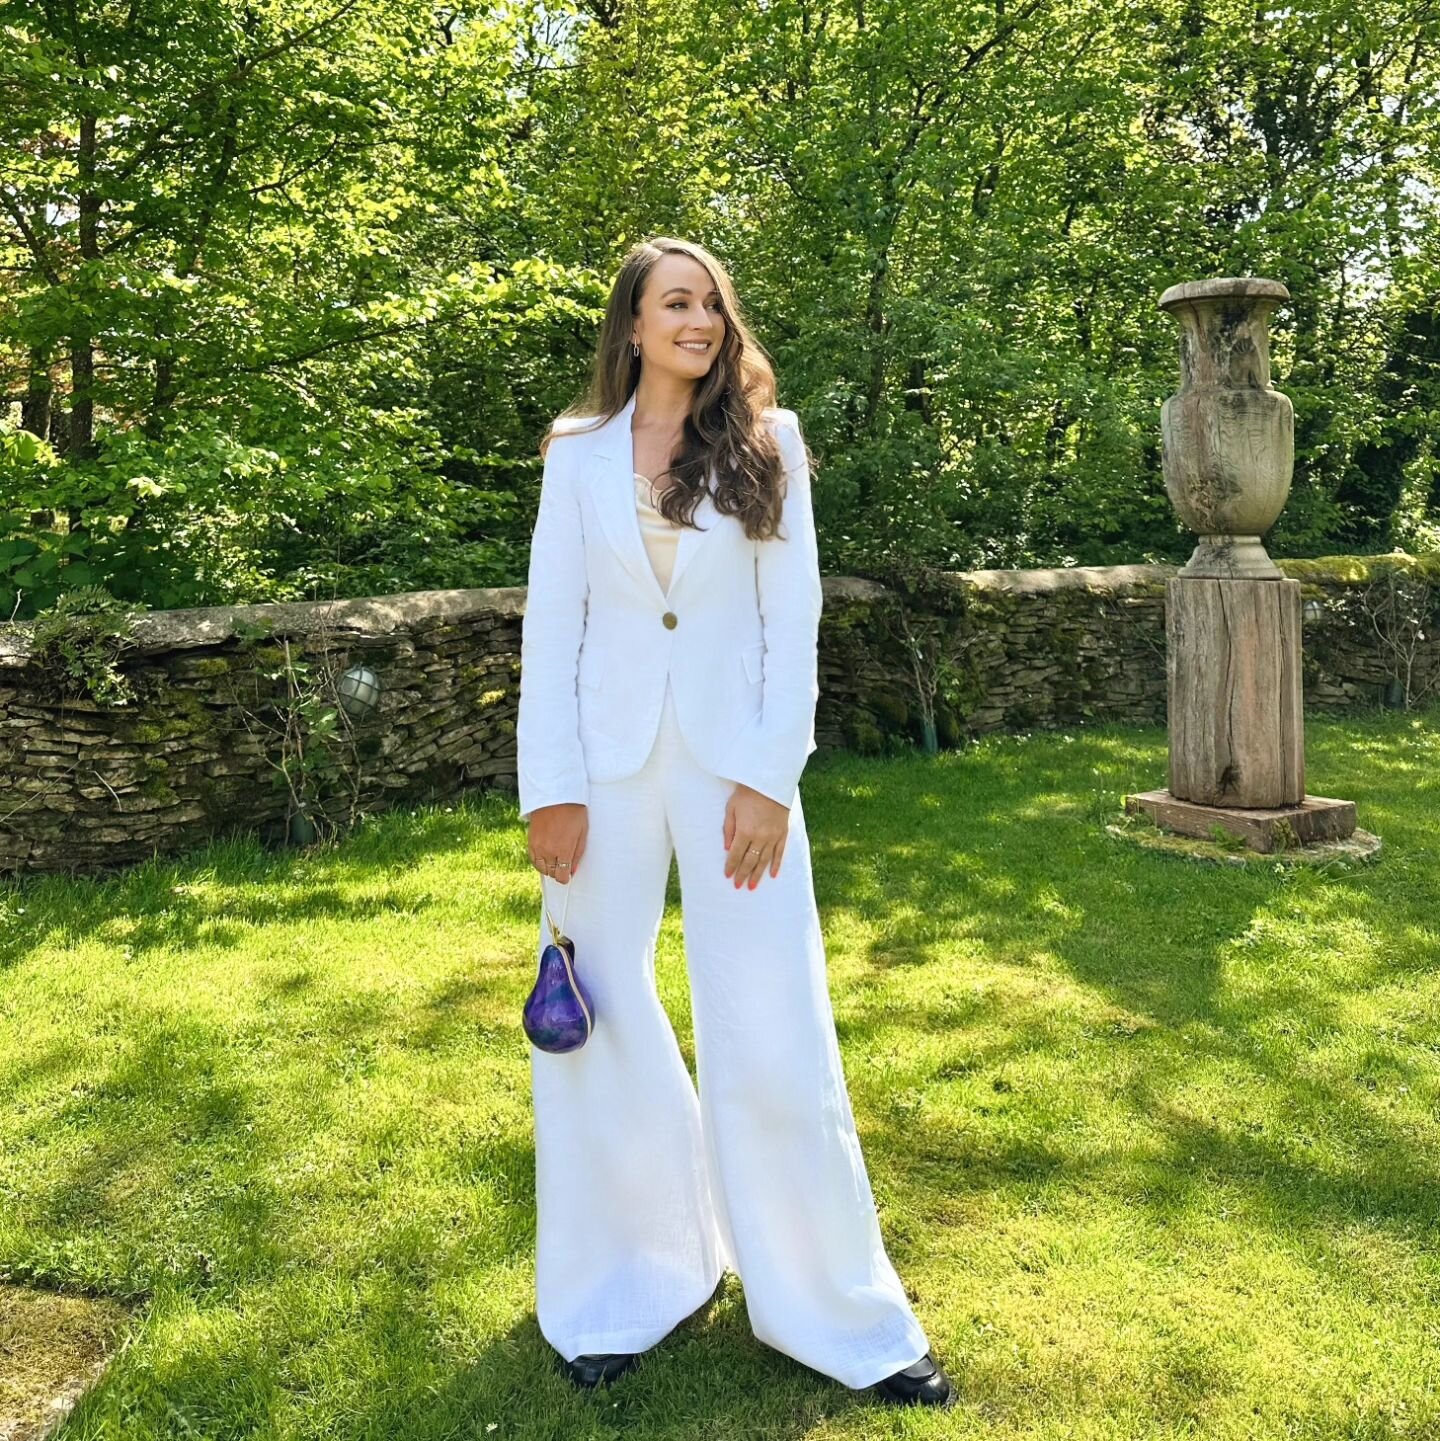 The Beautiful @ash.mcdonnell wearing our carefully crafted linen suit at Highgrove house for a @penhaligons_london  event recently ❤️❤️❤️